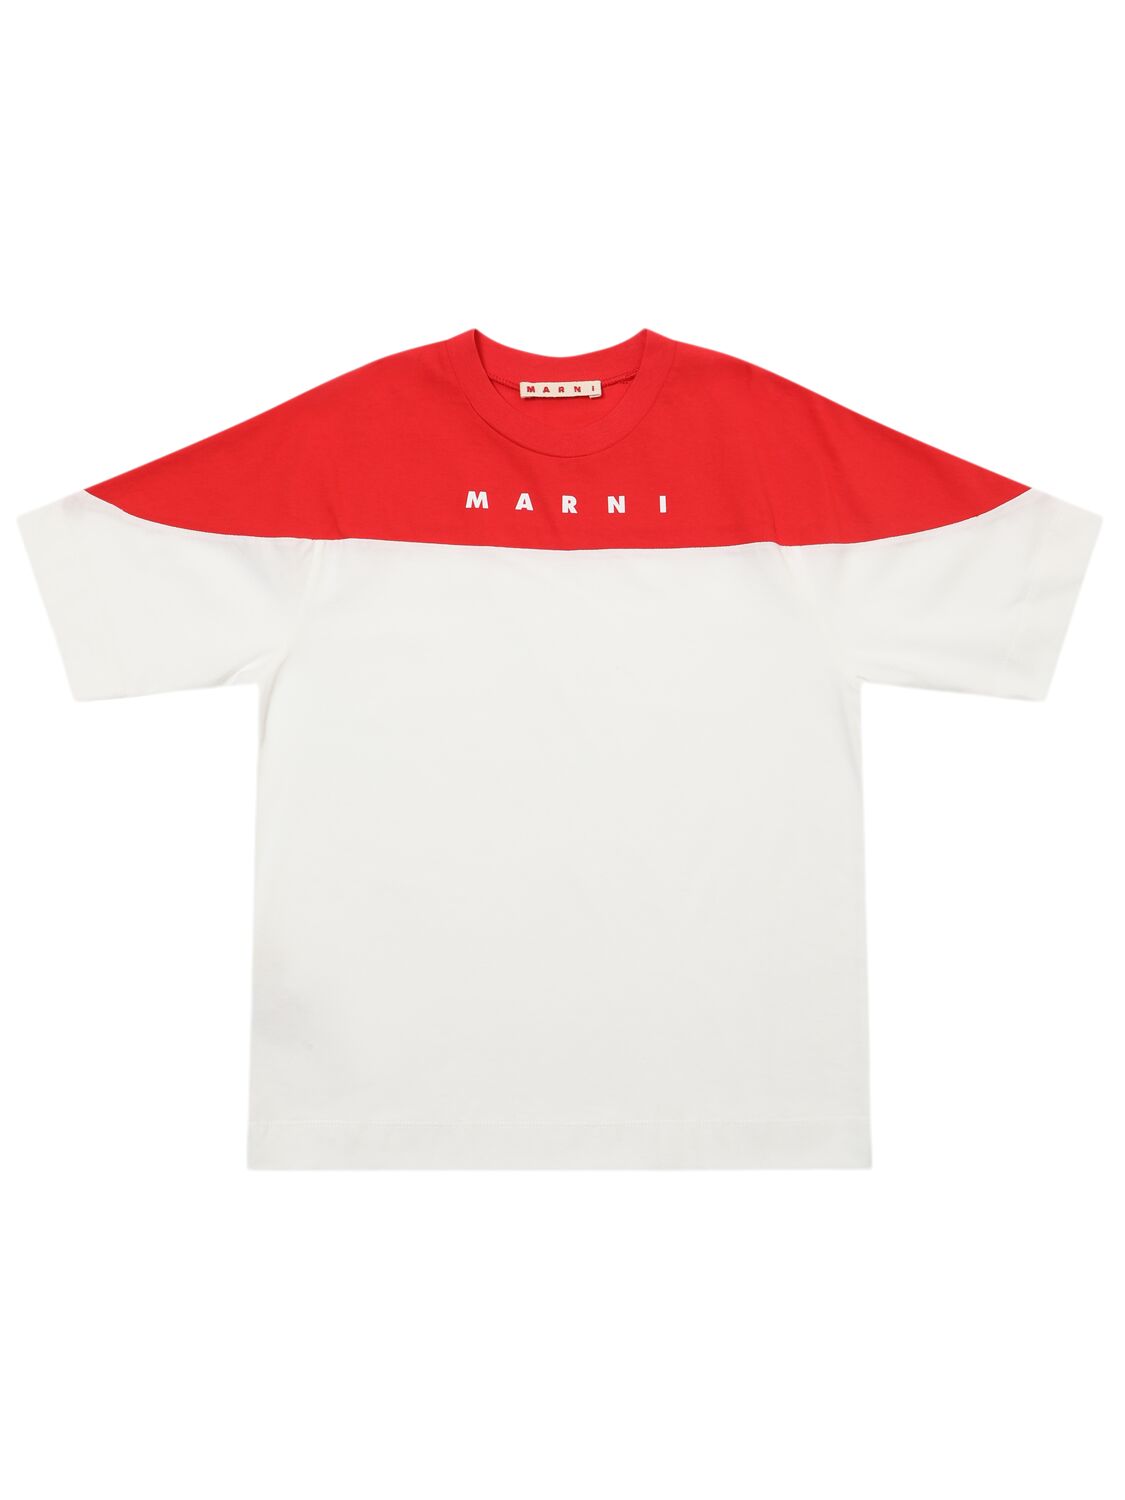 Marni Junior Cotton Jersey T-shirt W/logo In White/red